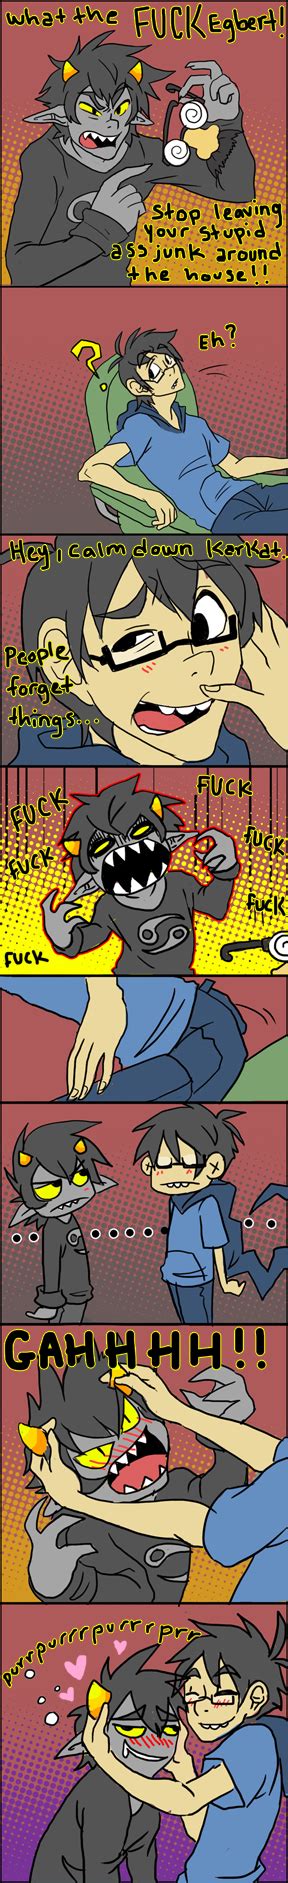 How To Calm Down A Karkat By Manicfool On Deviantart